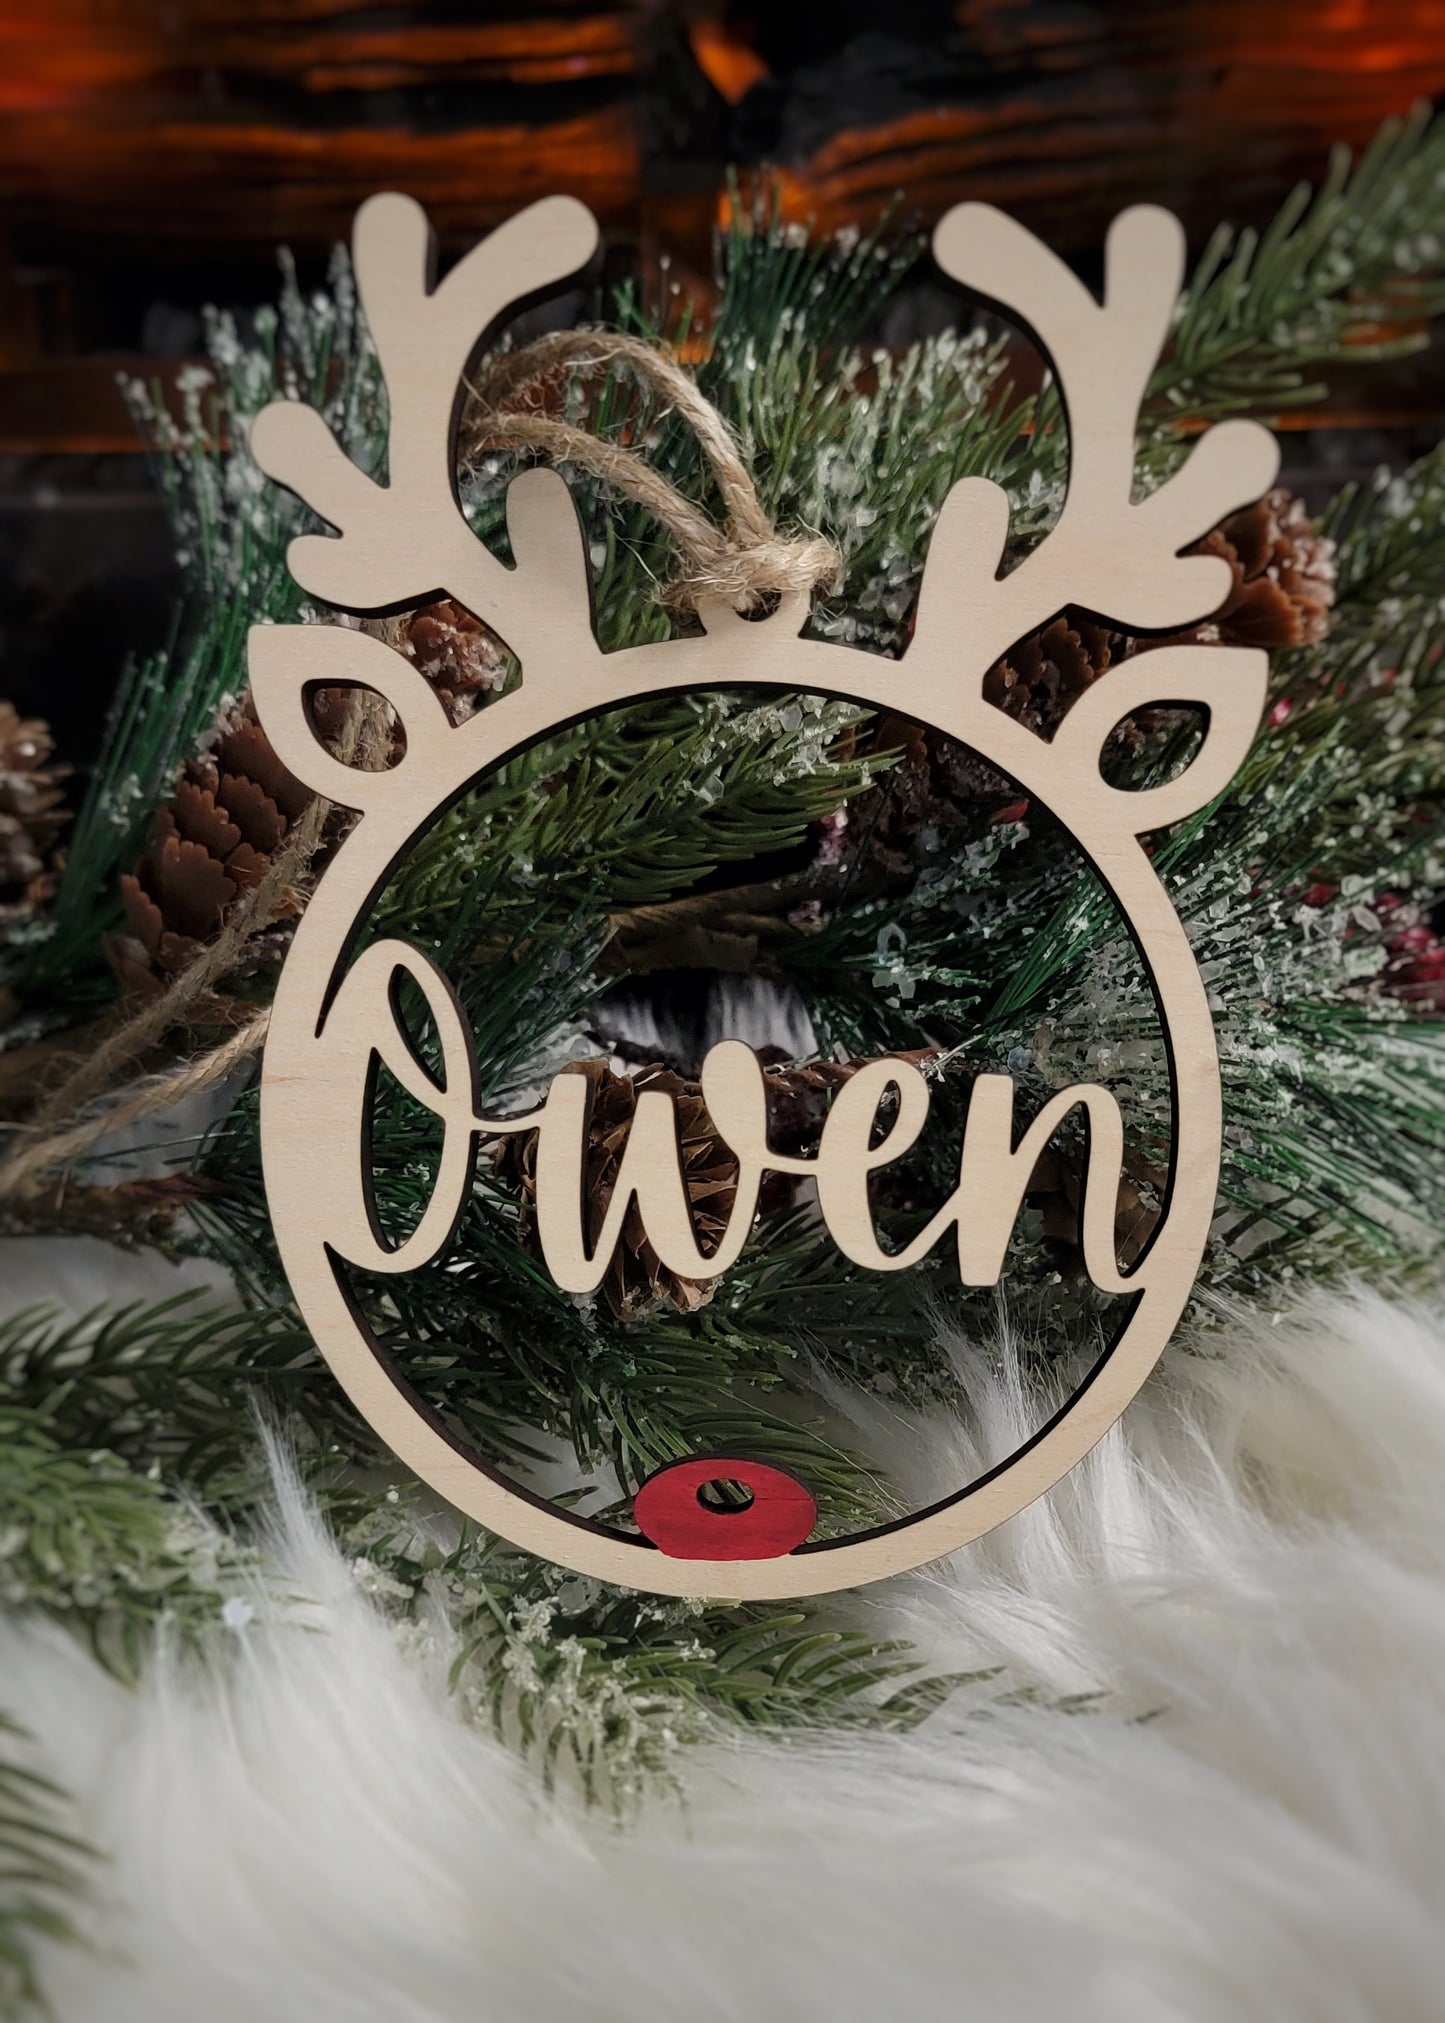 Personalized reindeer ornament